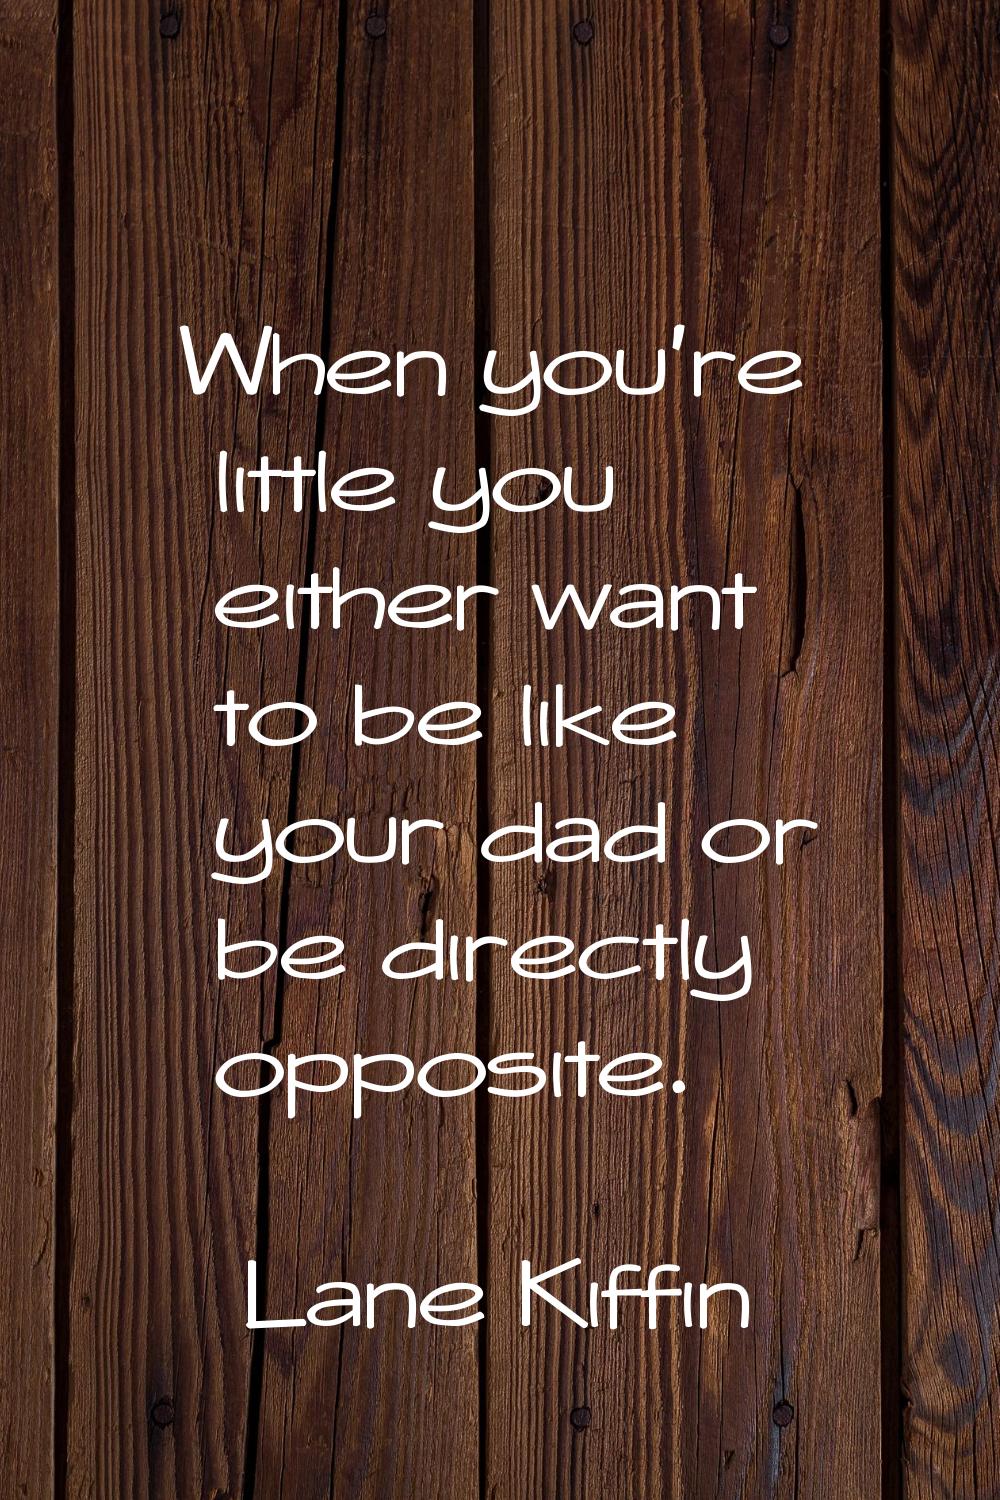 When you're little you either want to be like your dad or be directly opposite.